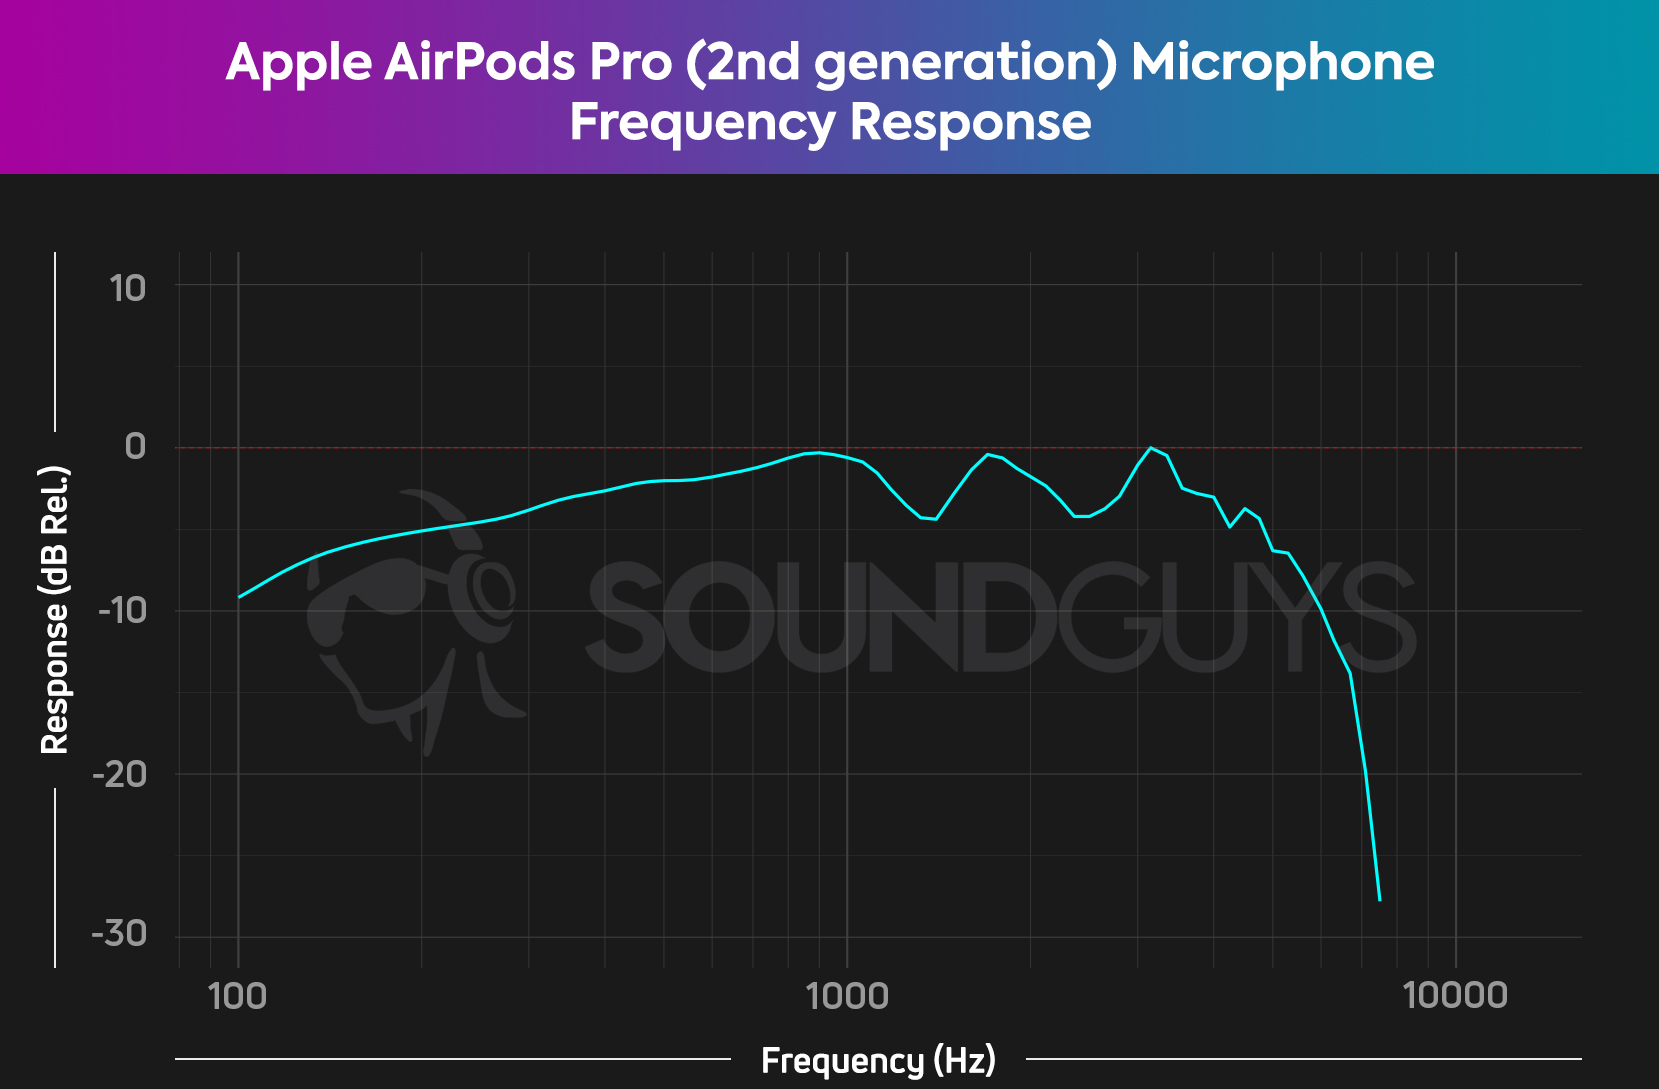 A chart depicts the AirPods Pro (2nd generation) microphone frequency response which under-emphasizes sub-bass frequencies.